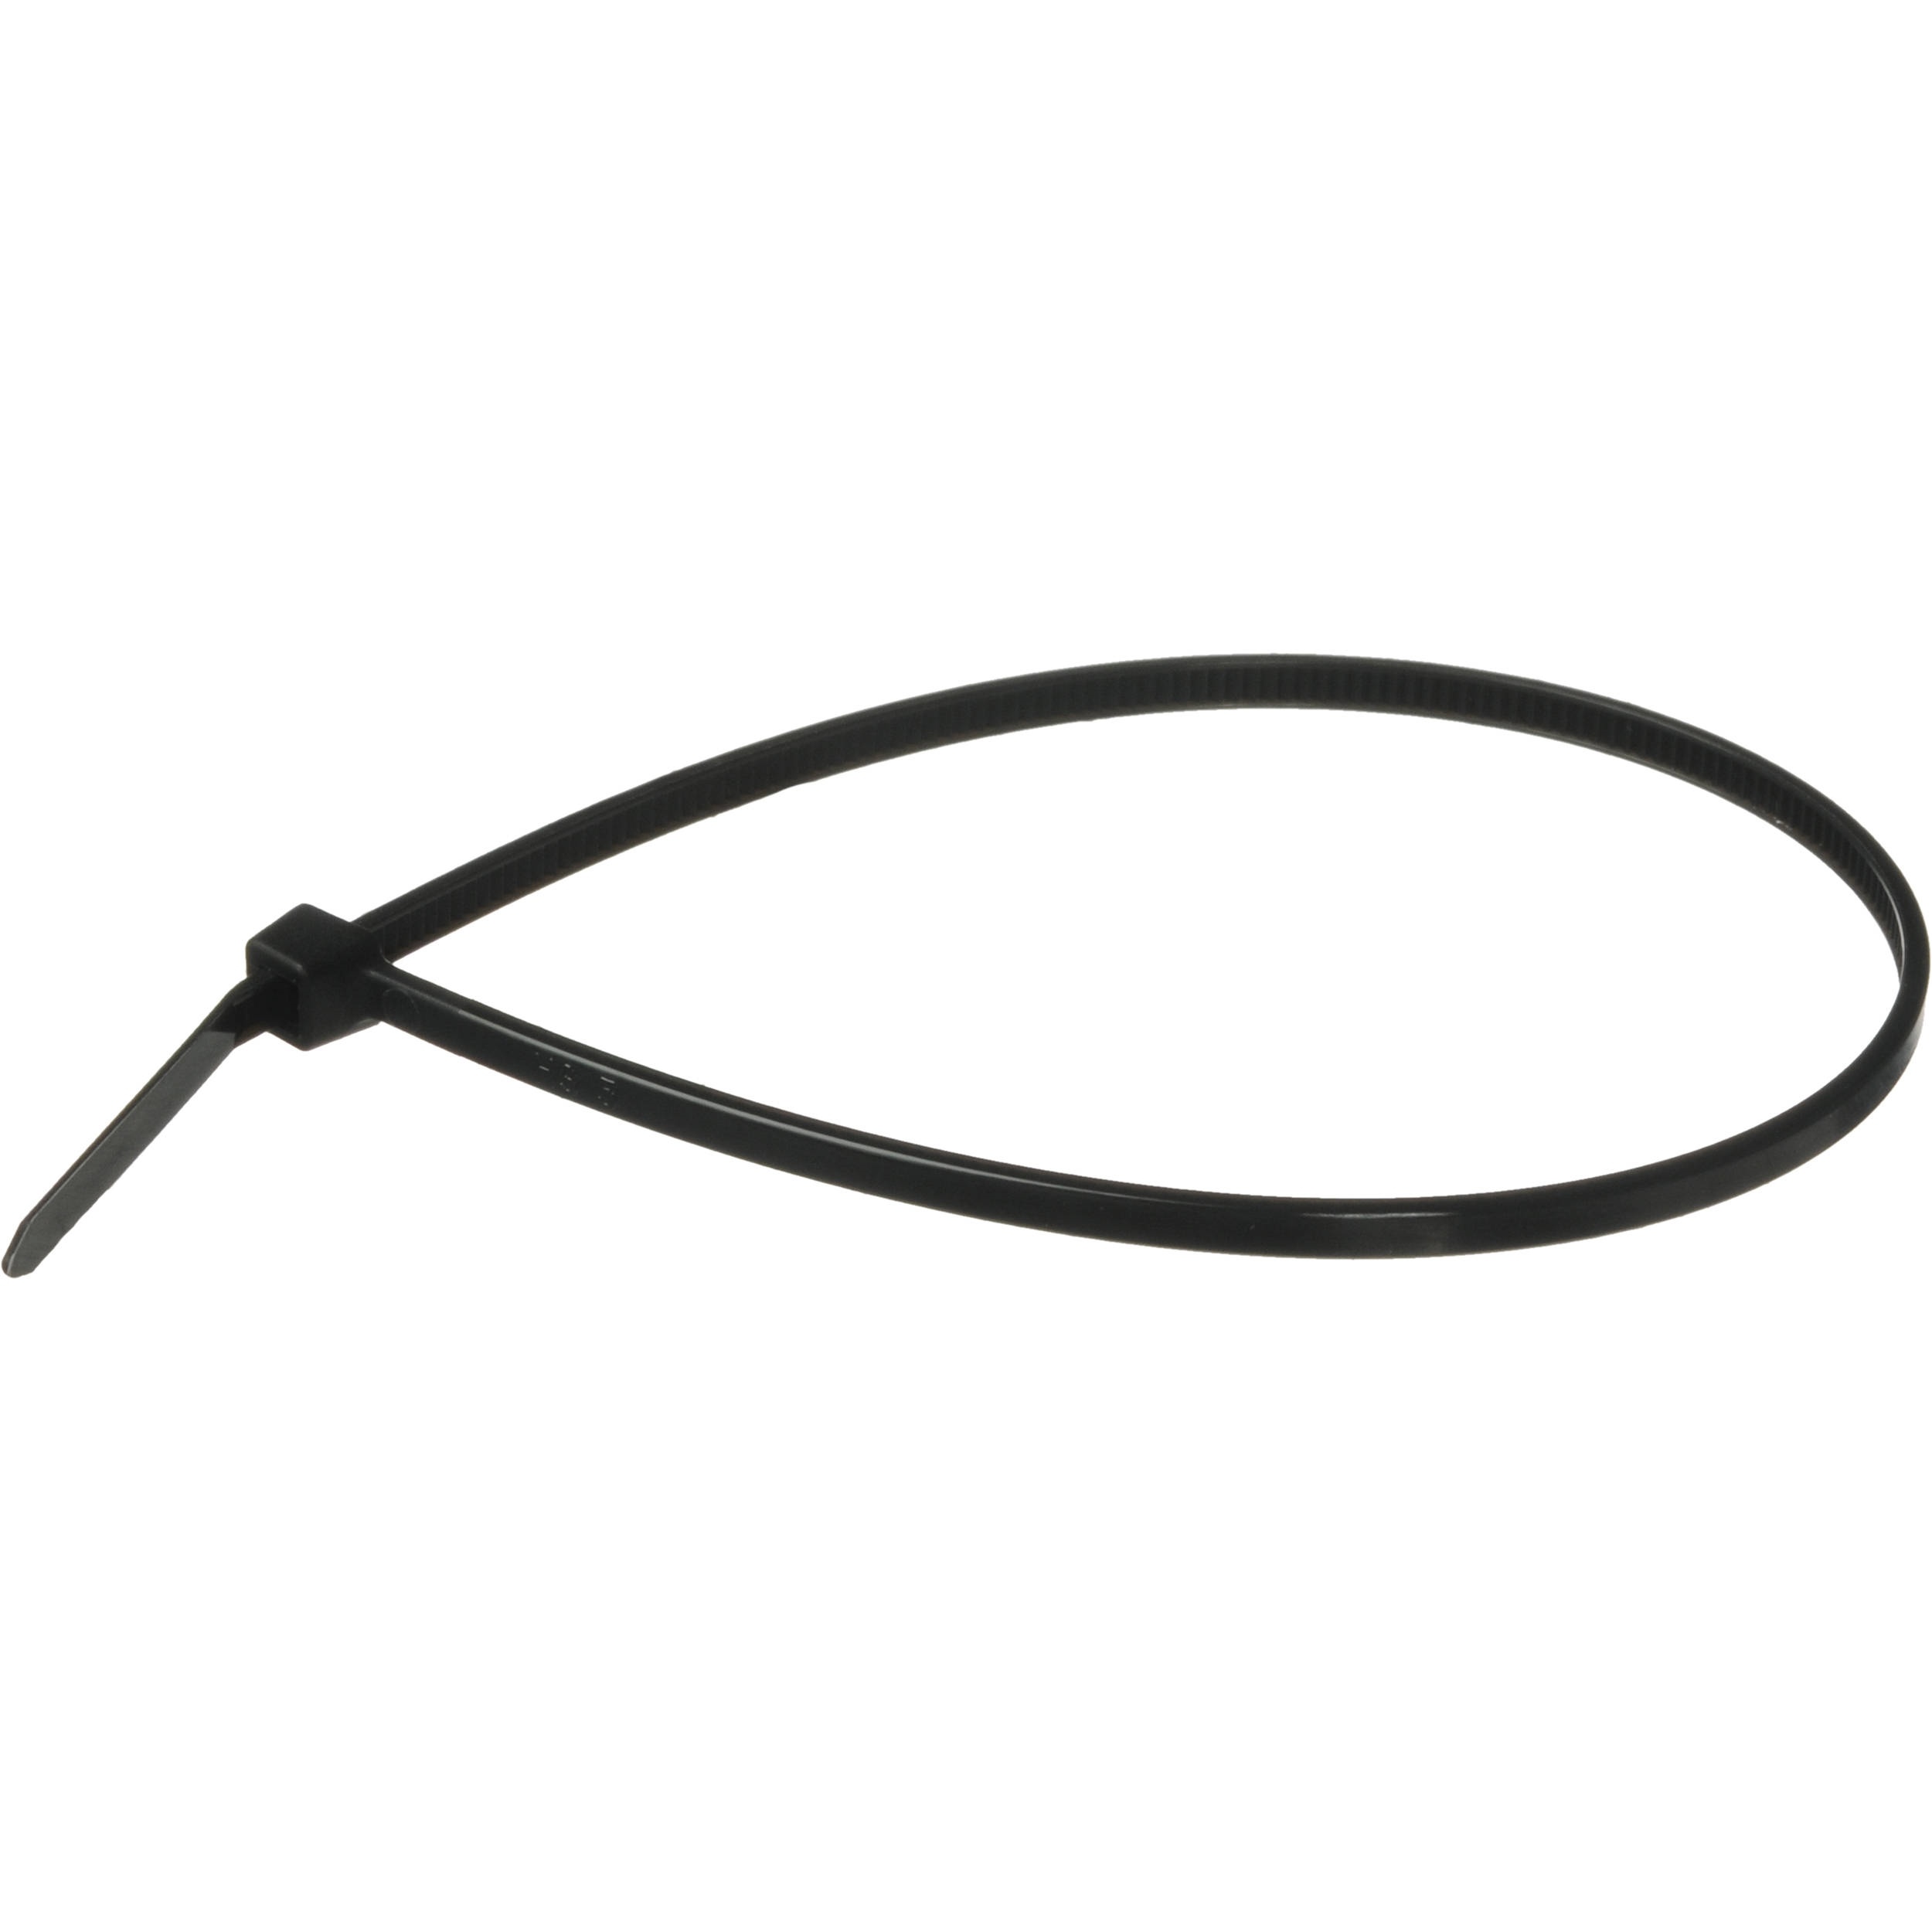 Pearstone 8" Plastic Cable Ties - Black (100-Pack)